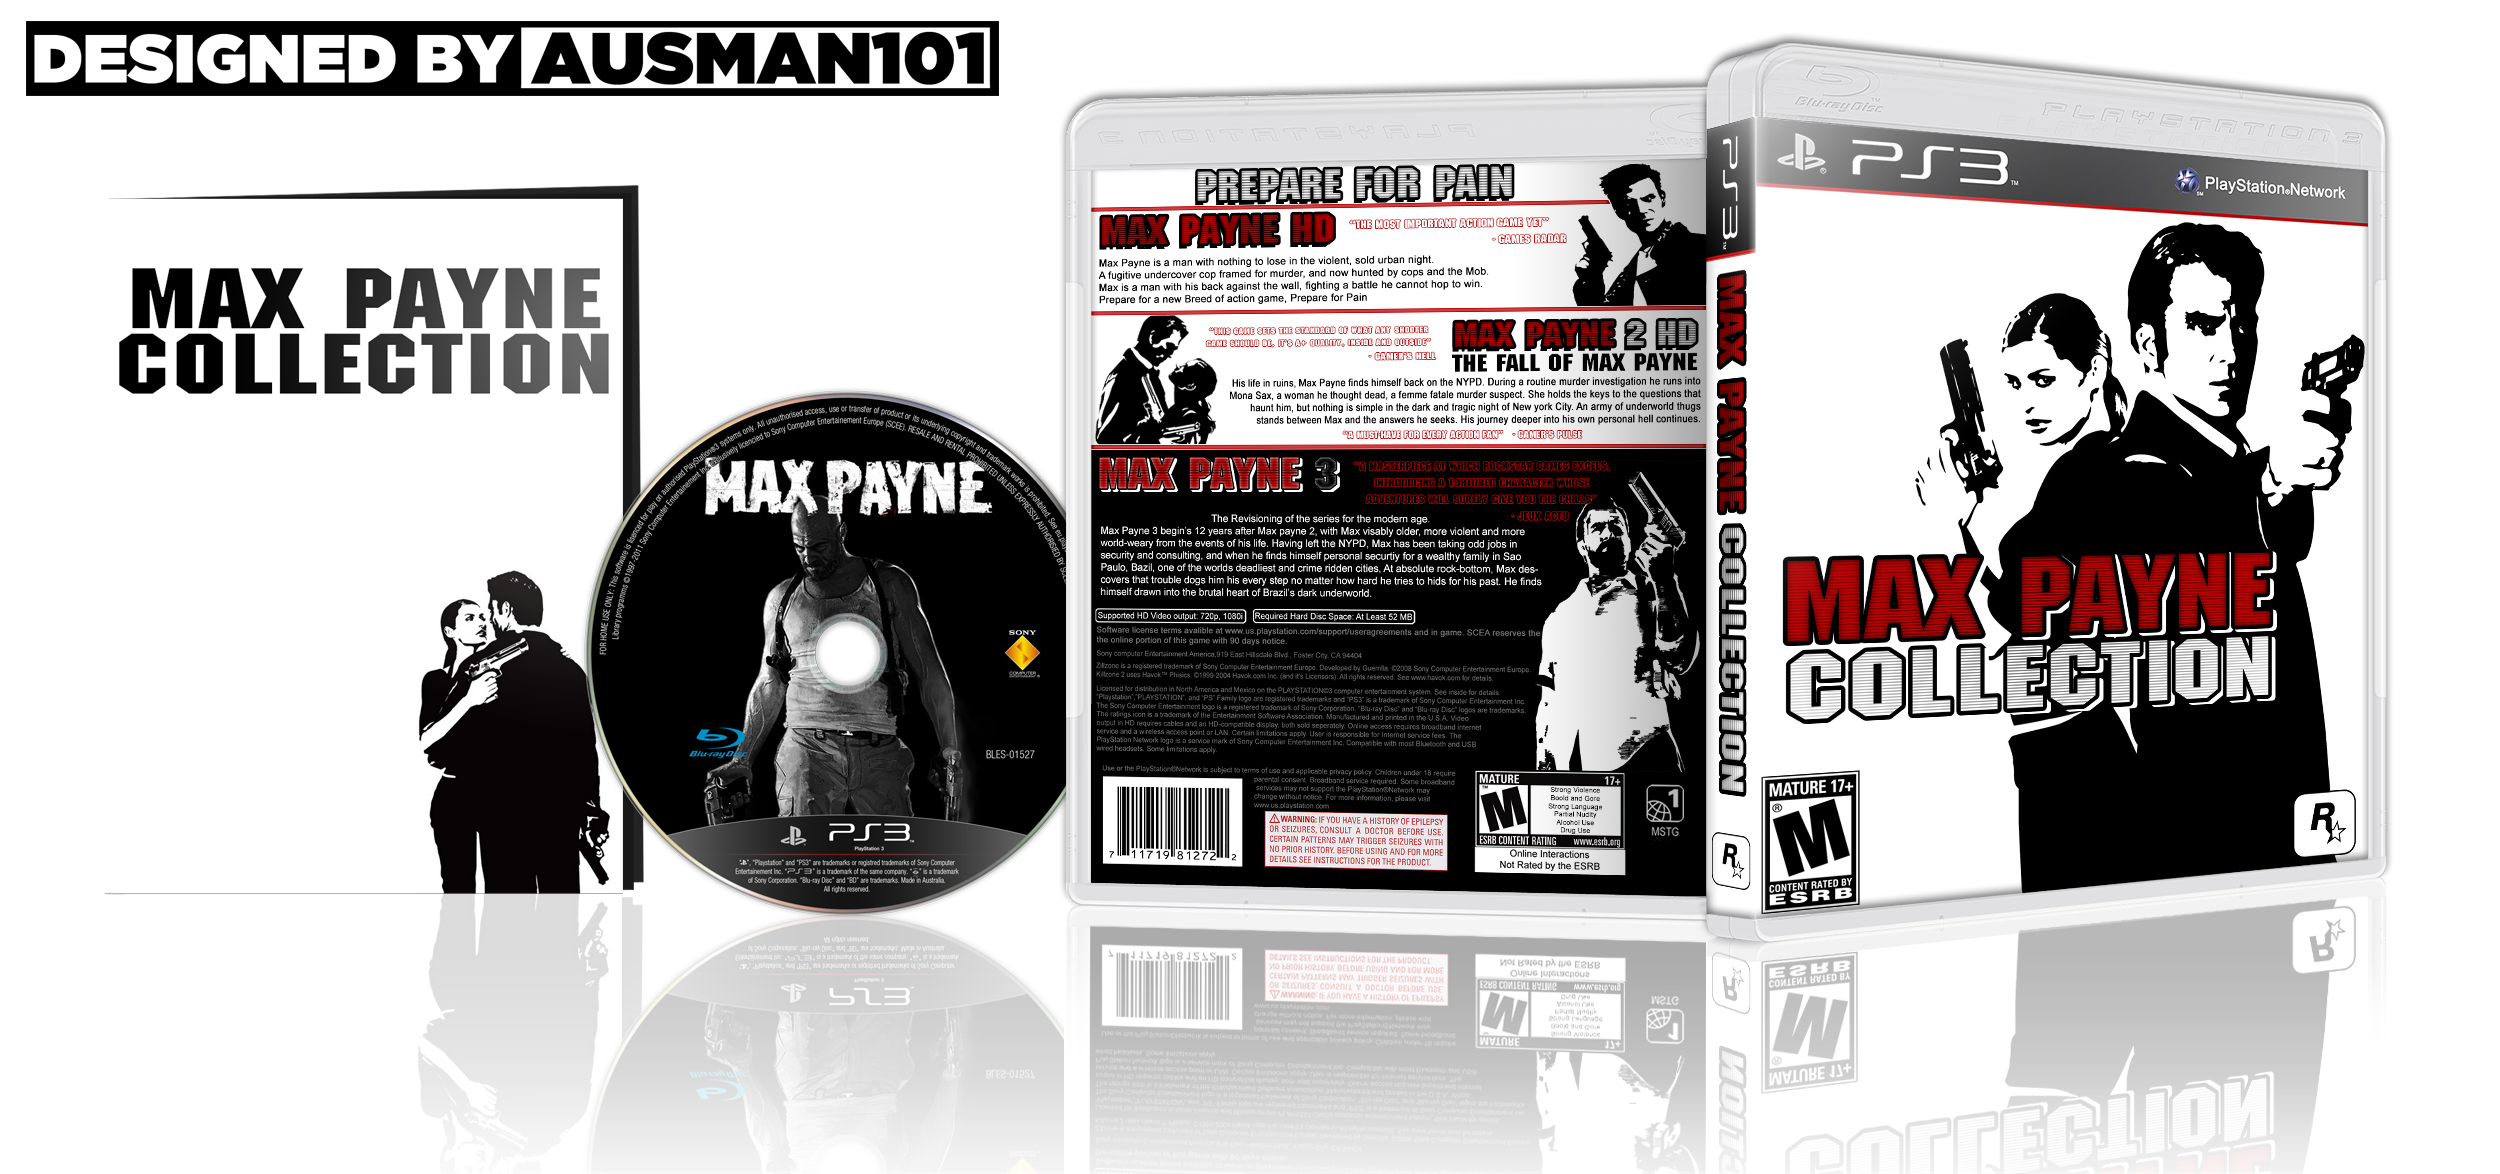 Max Payne collection box cover